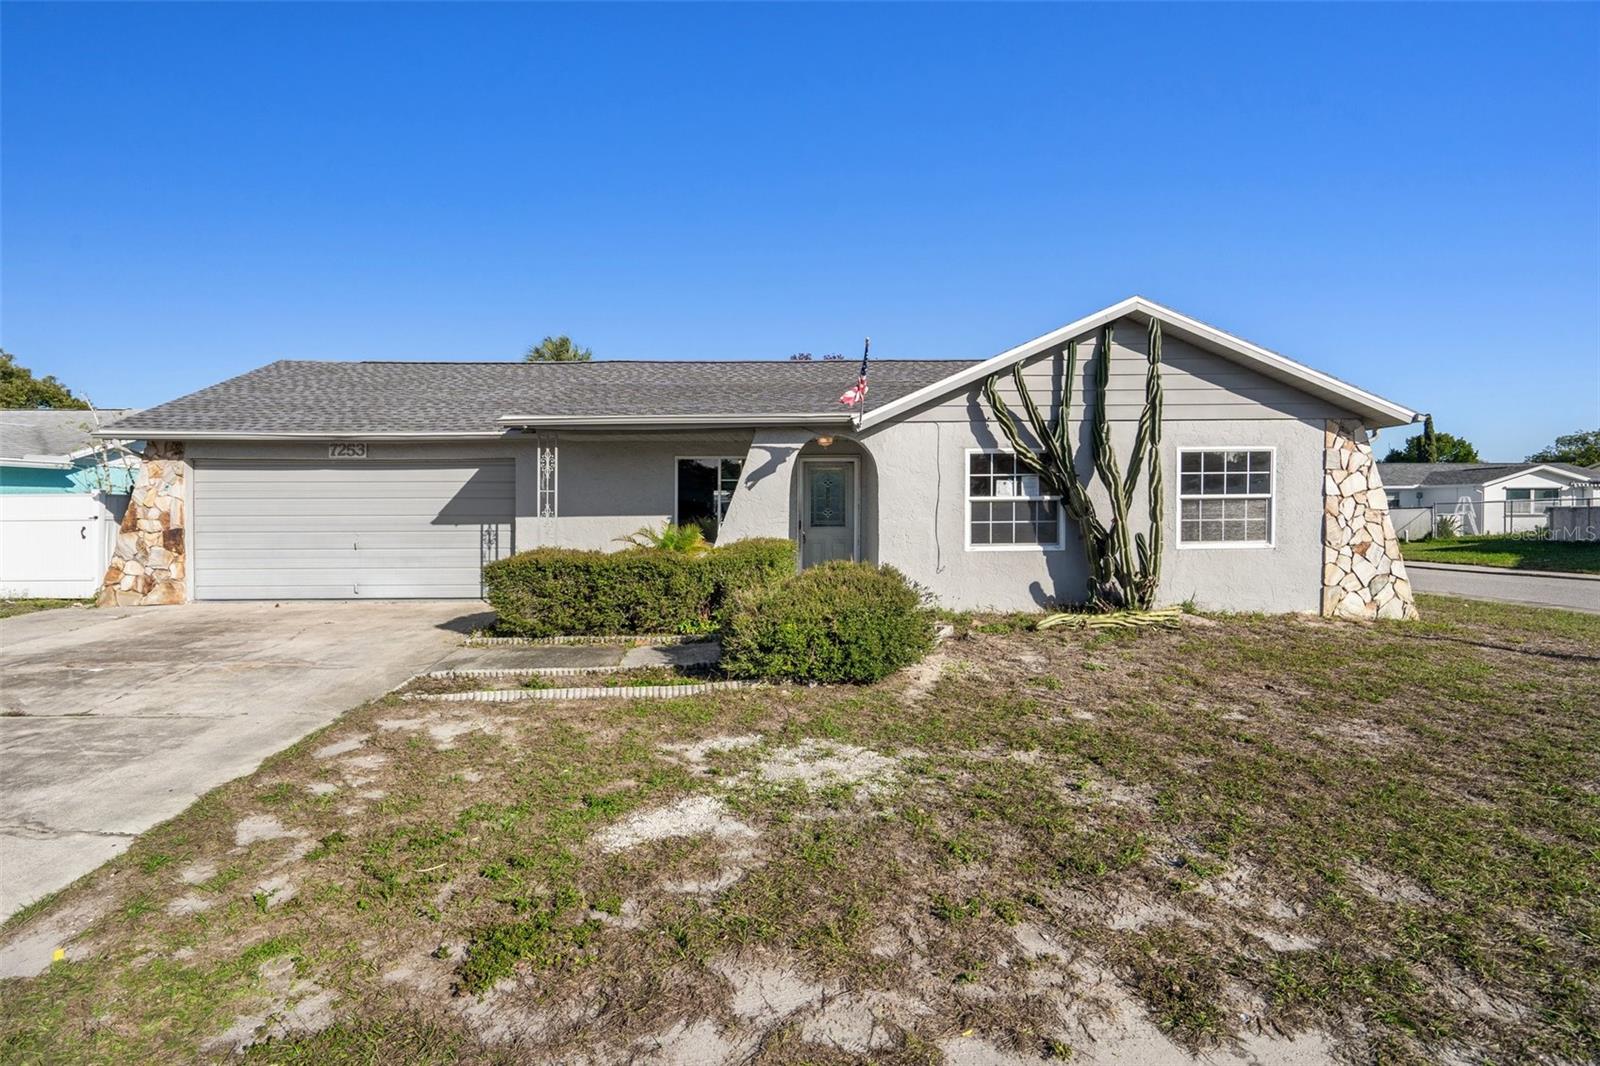 Details for 7253 Cay Drive, PORT RICHEY, FL 34668